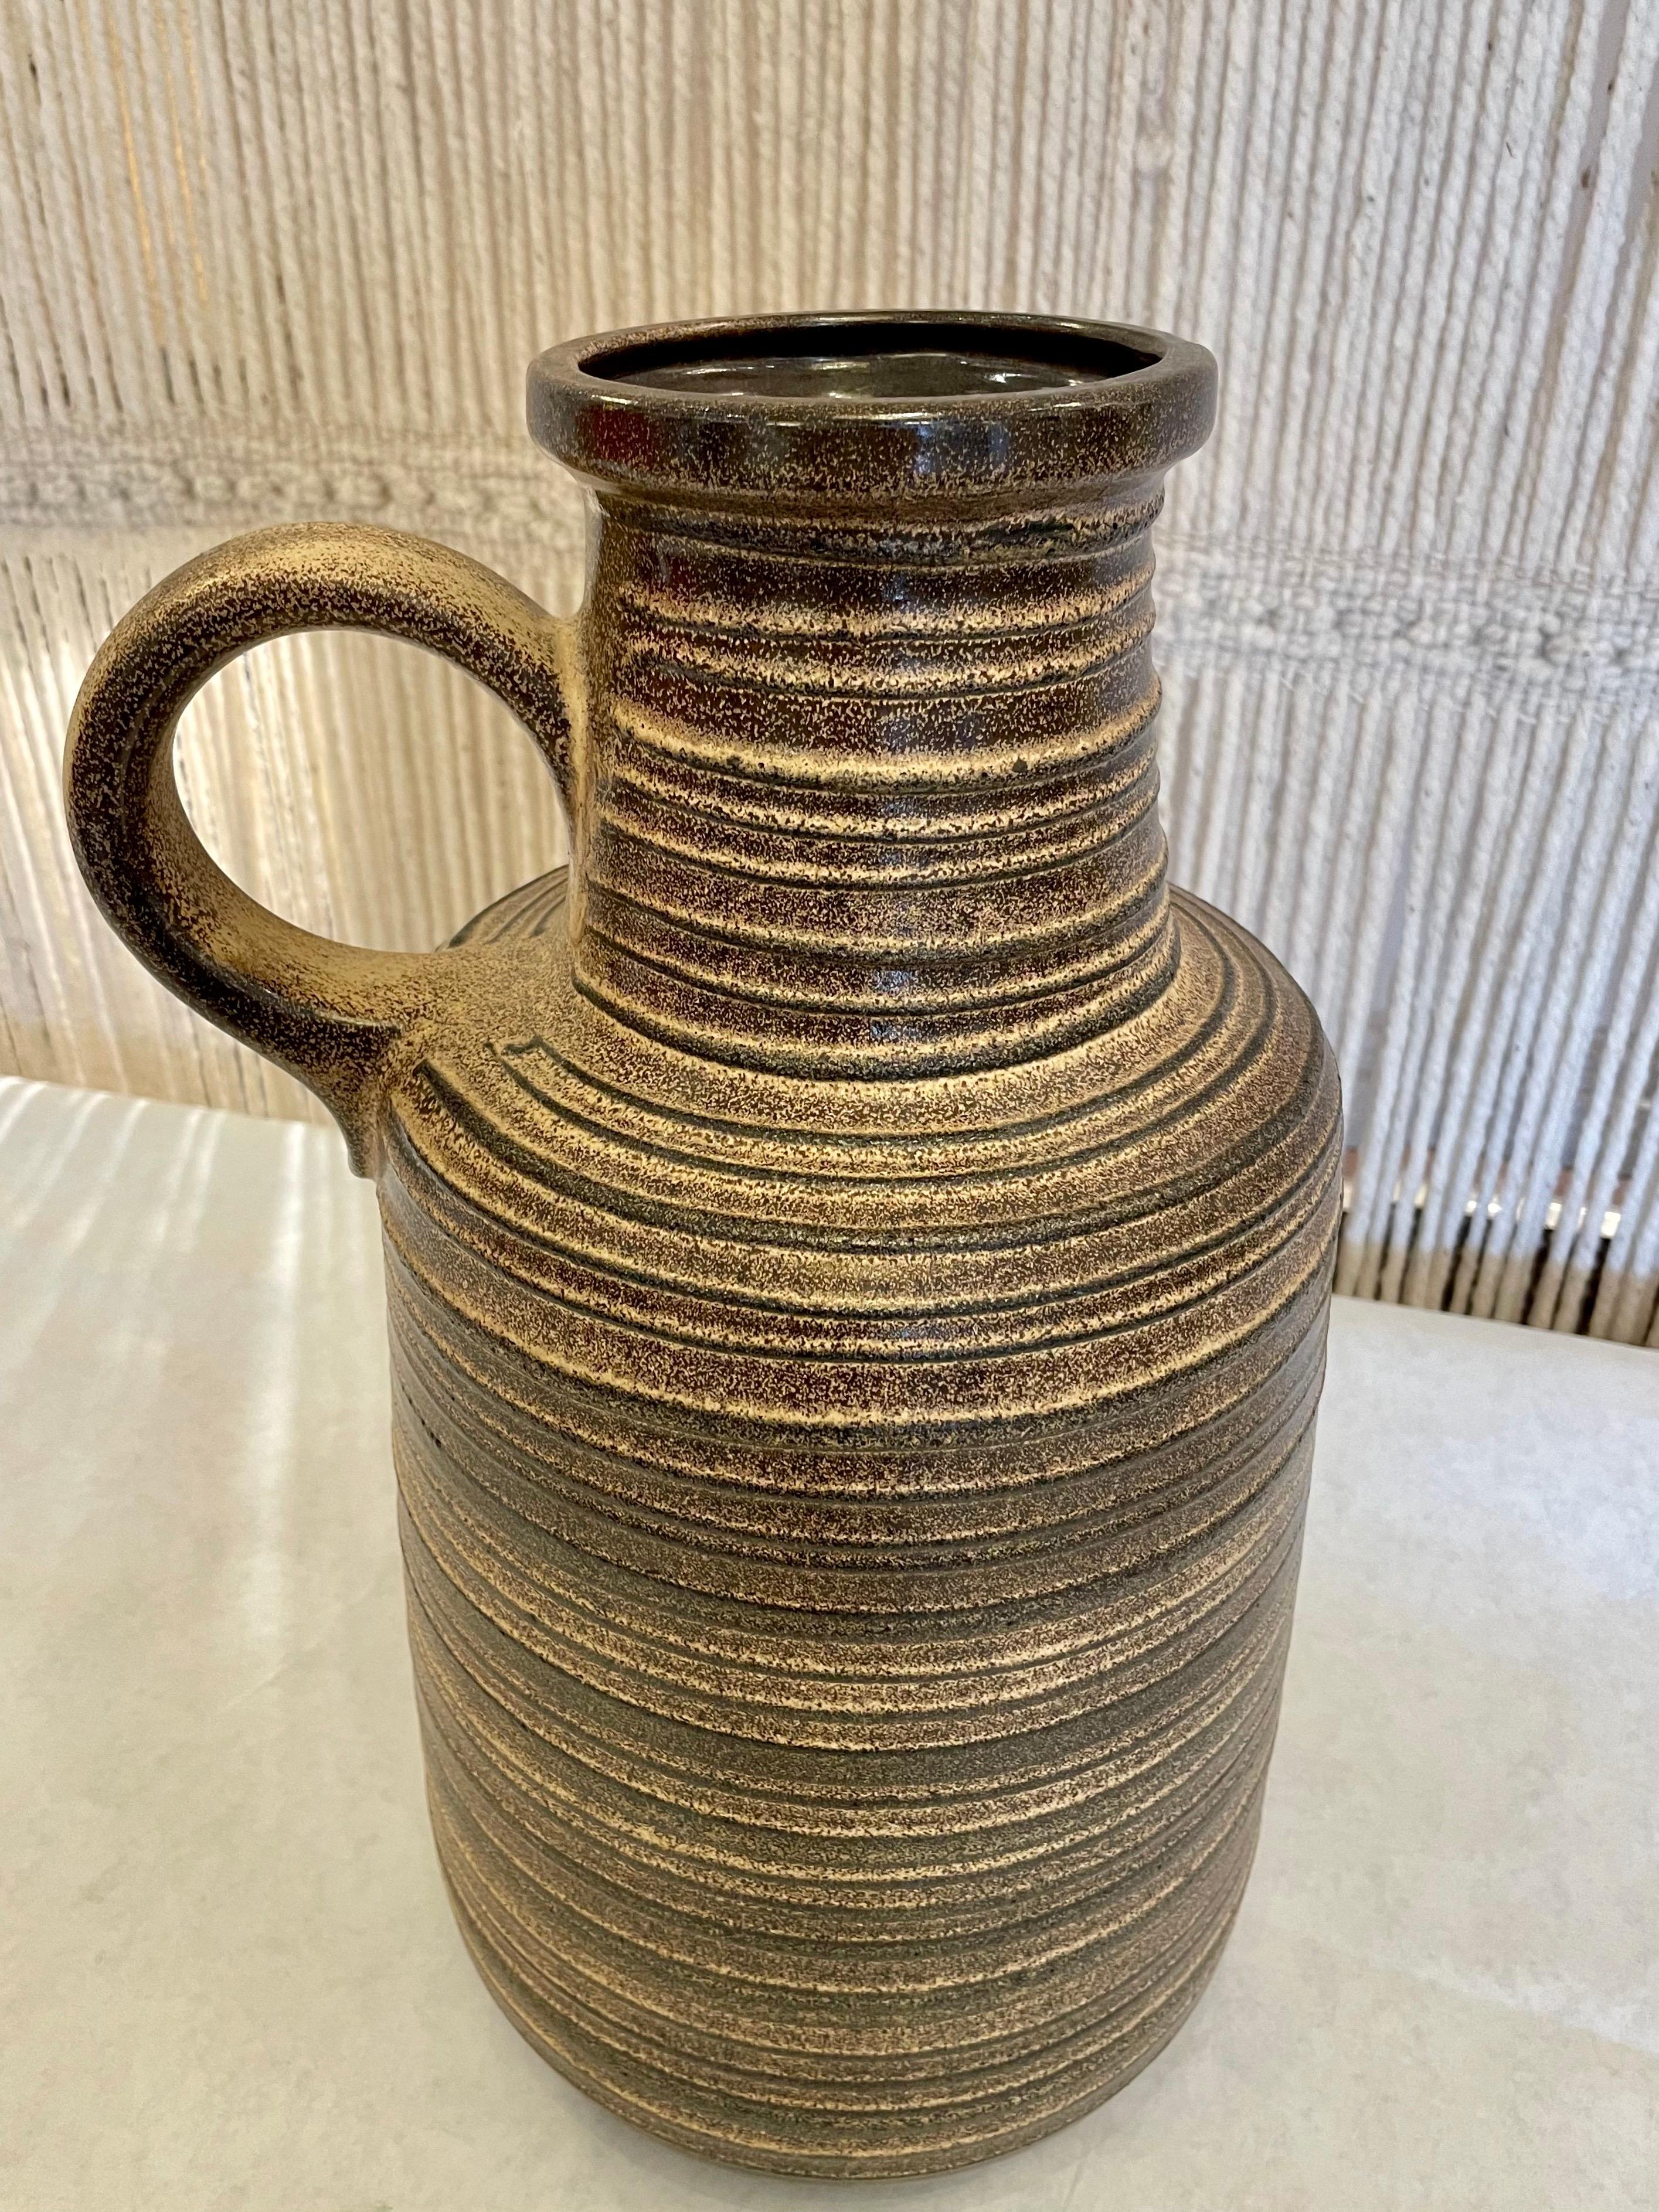 The ribbed texture to this wonderful West German pottery vase has brown and beige tones. Oversized handle and in great condition.